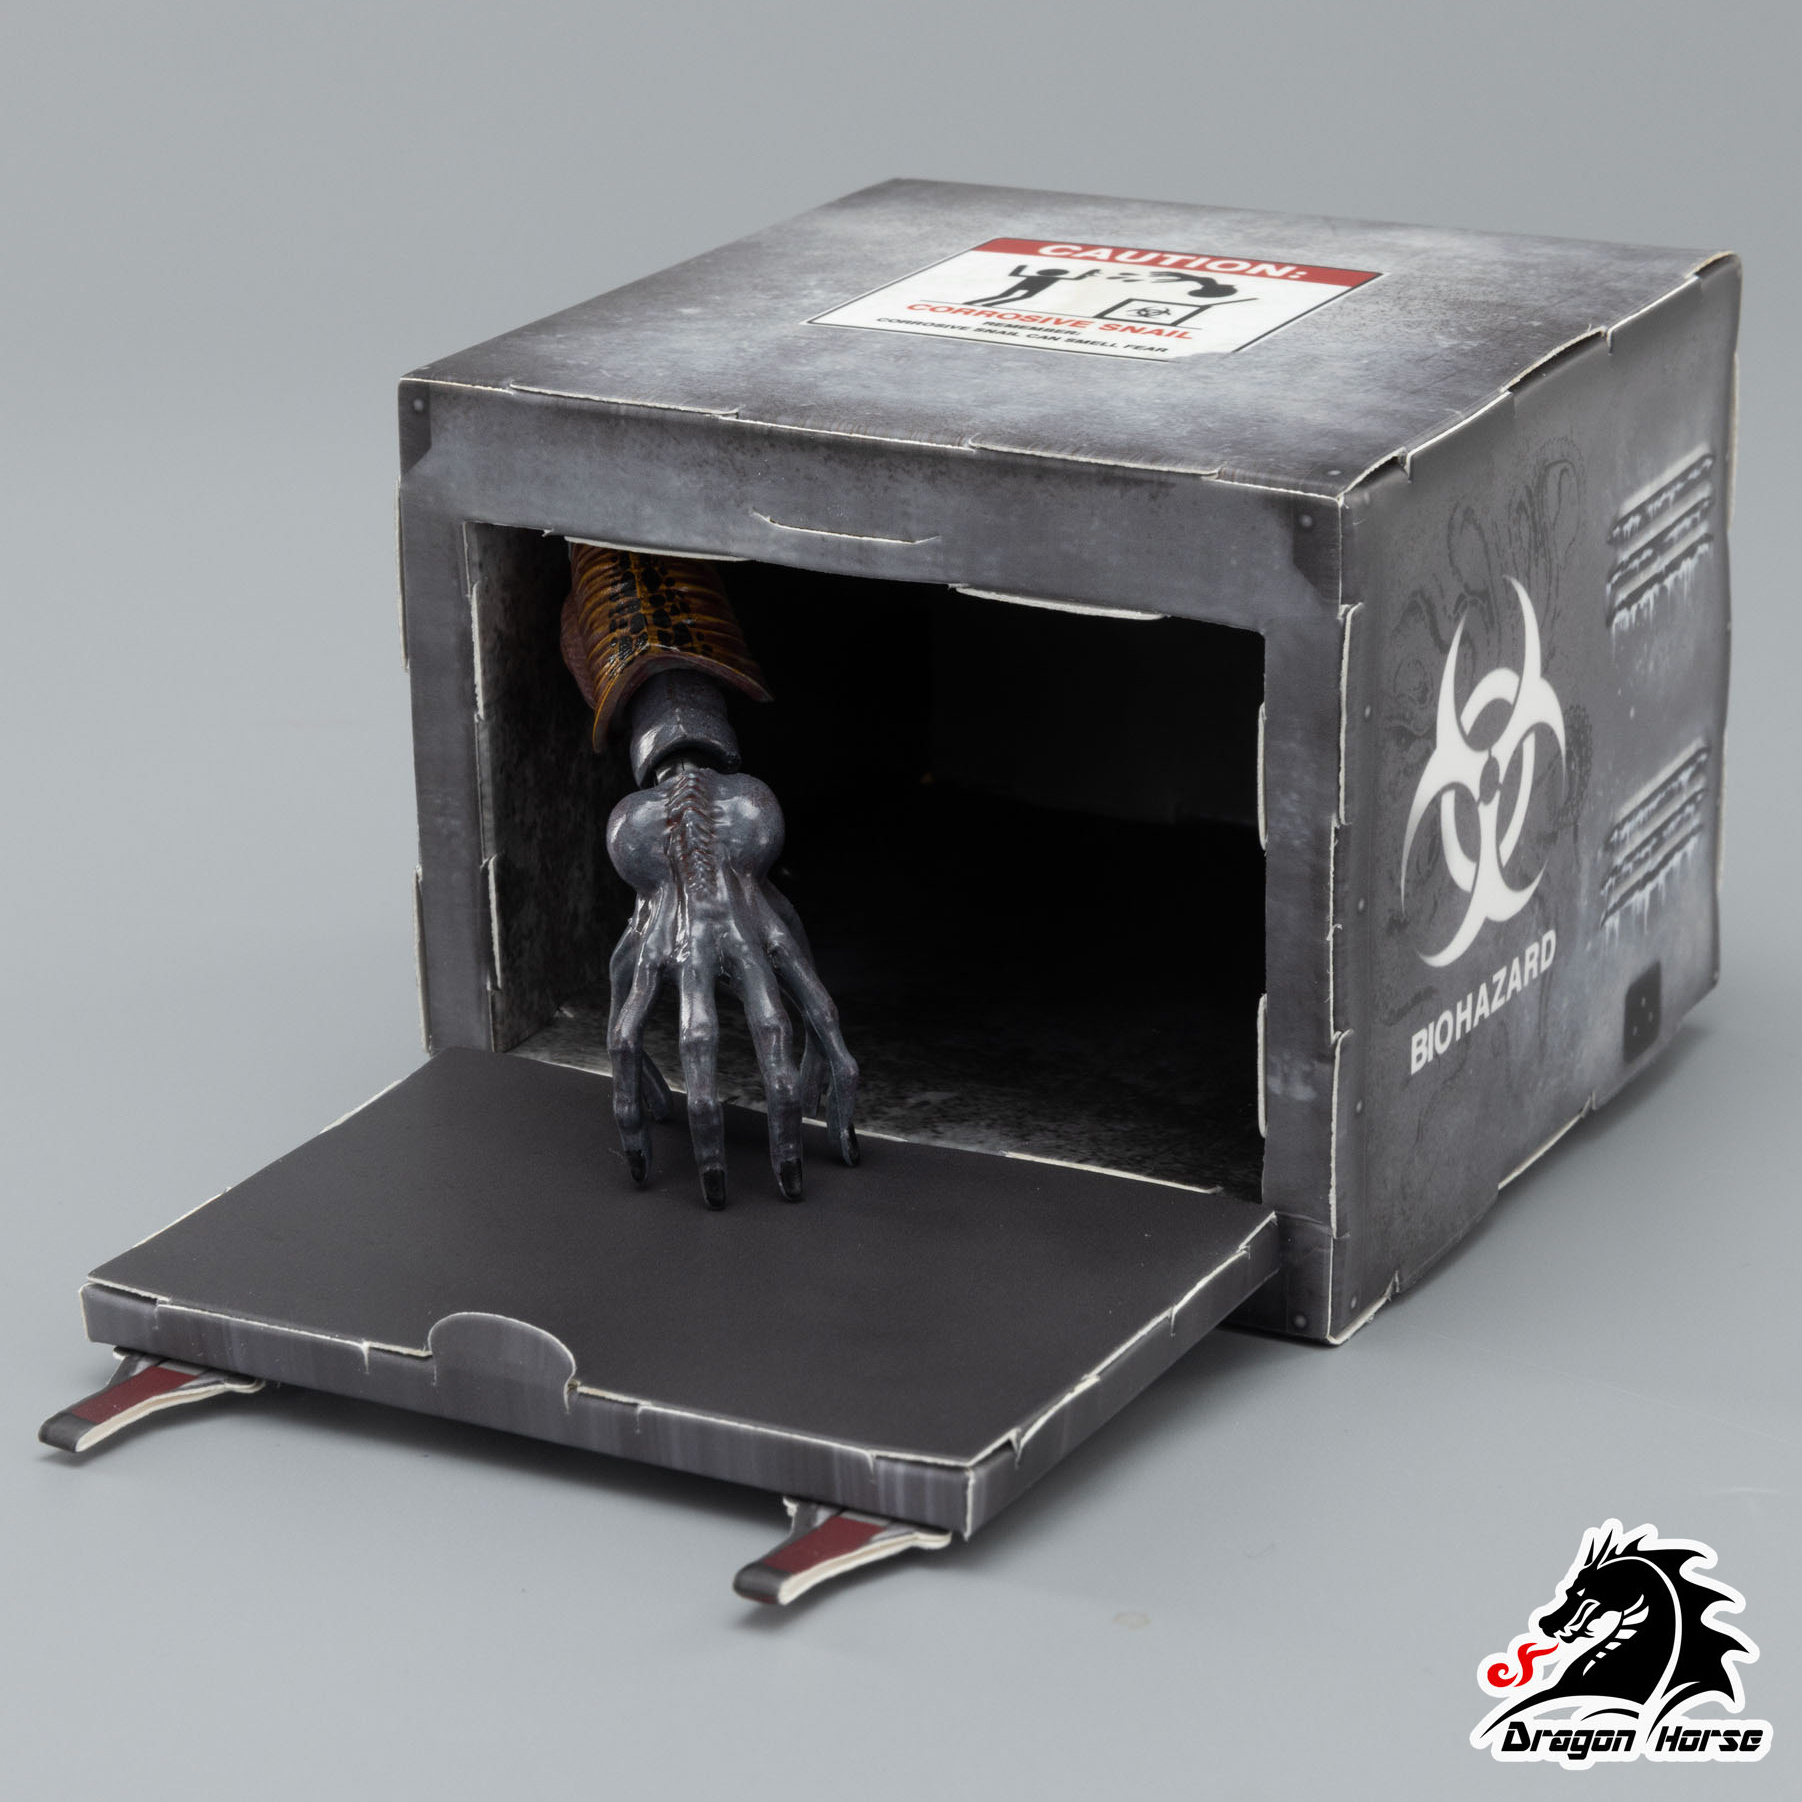 SCP Foundation Series Class-D Personnel (SCP-181 Lucky) 1/12 Scale Figure